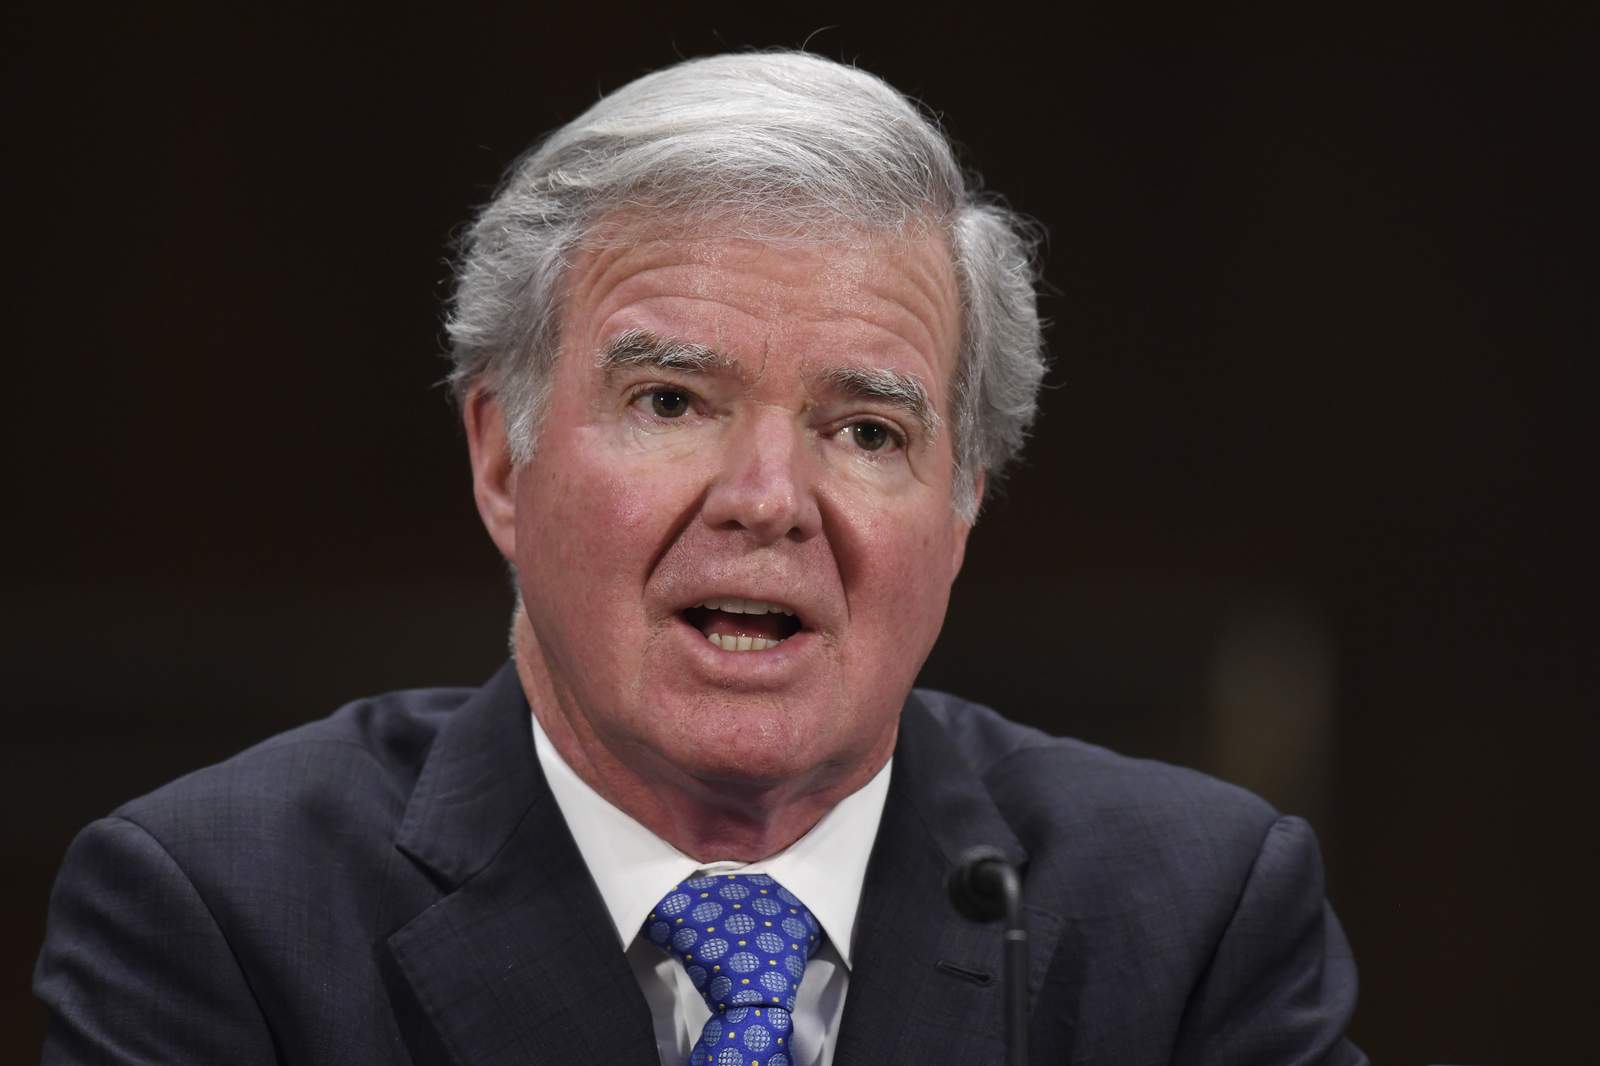 AP Interview: Emmert says NCAA must stay open to reform